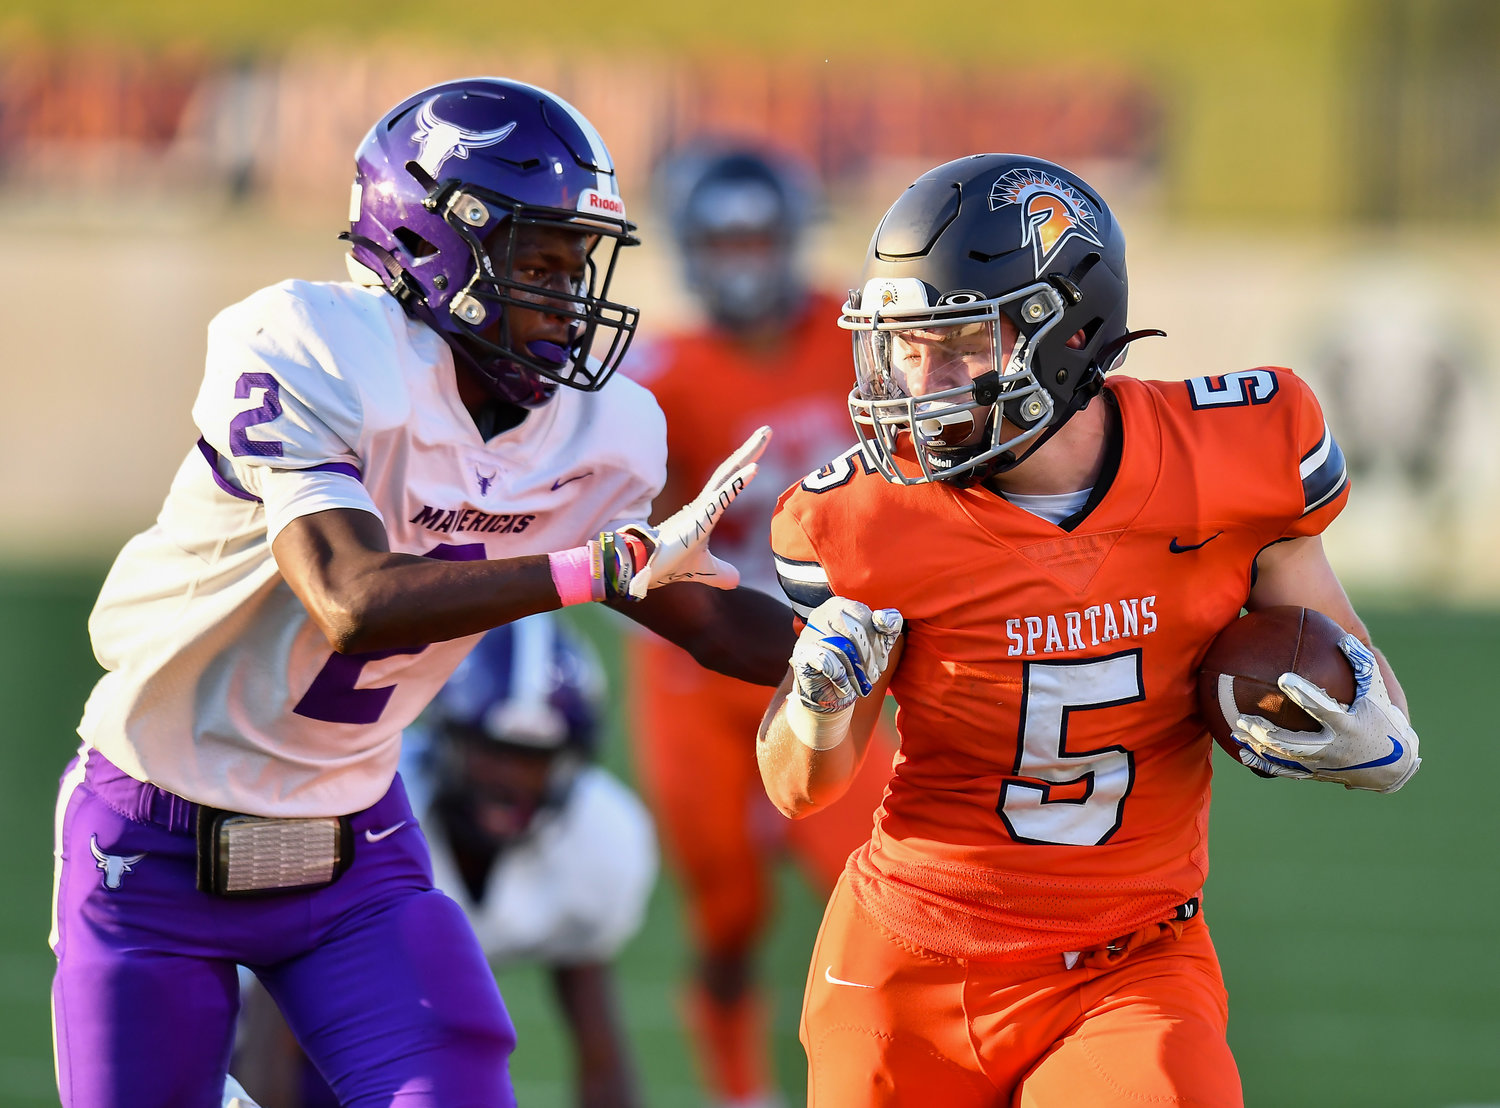 Katy, Tx. Oct 8, 2021: Seven Lakes Barrett Hudson #5 picks up the first down before being pushed out of bounds by Morton Ranchs Marcus Jackson #2 during a District 19-6A game between Seven Lakes and Morton Ranch at Legacy Stadium in Katy. (Photo by Mark Goodman / Katy Times)